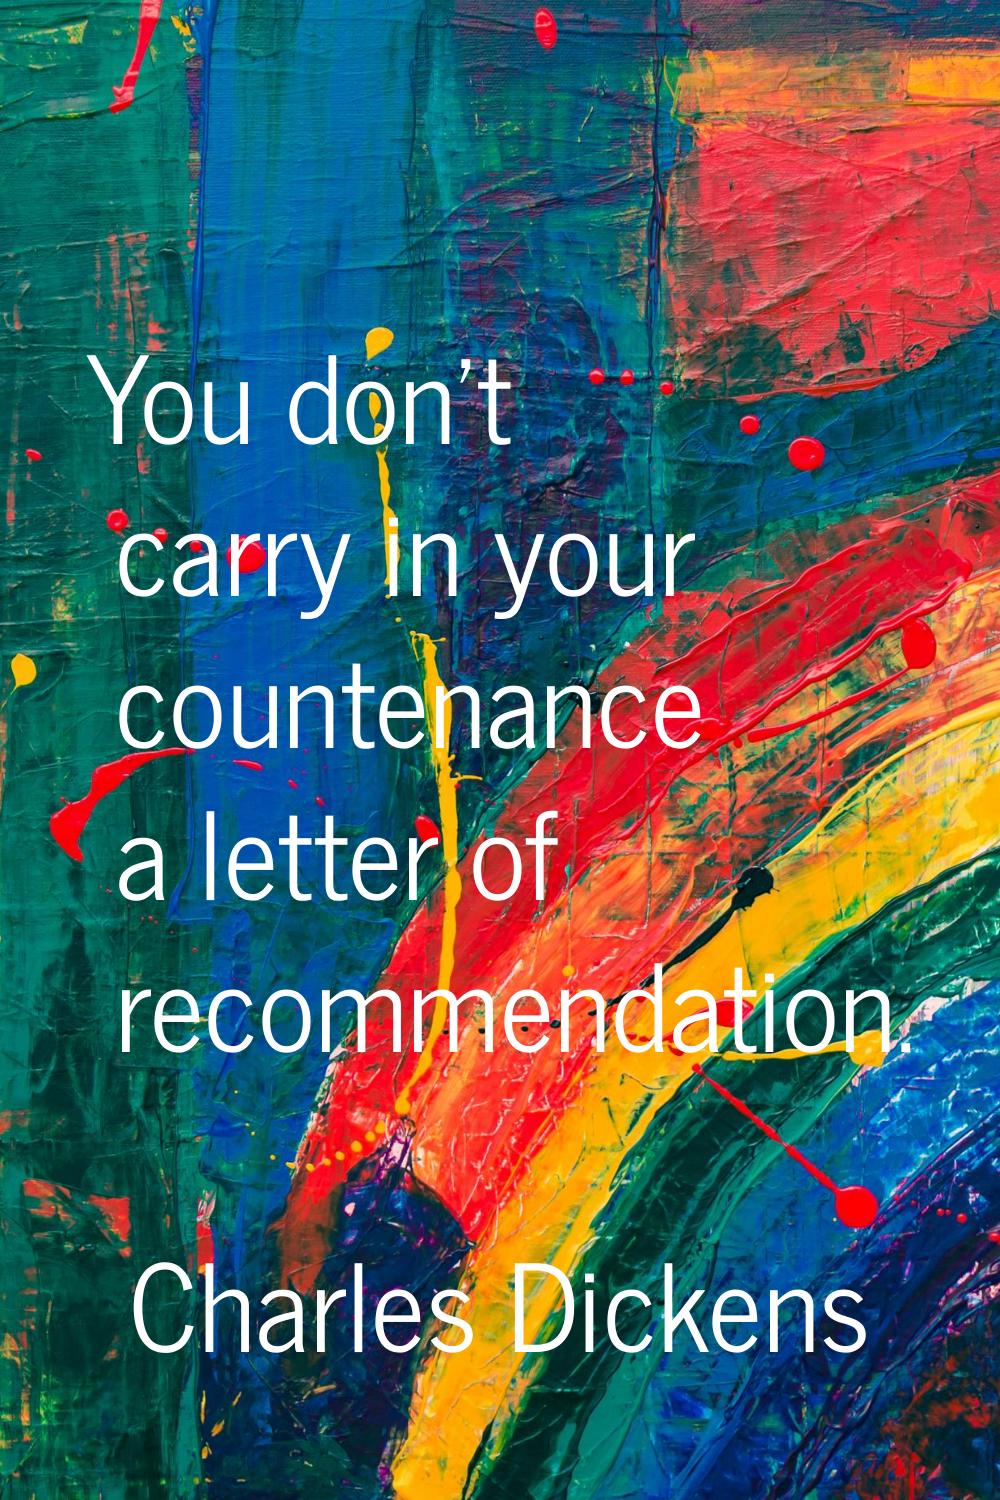 You don't carry in your countenance a letter of recommendation.